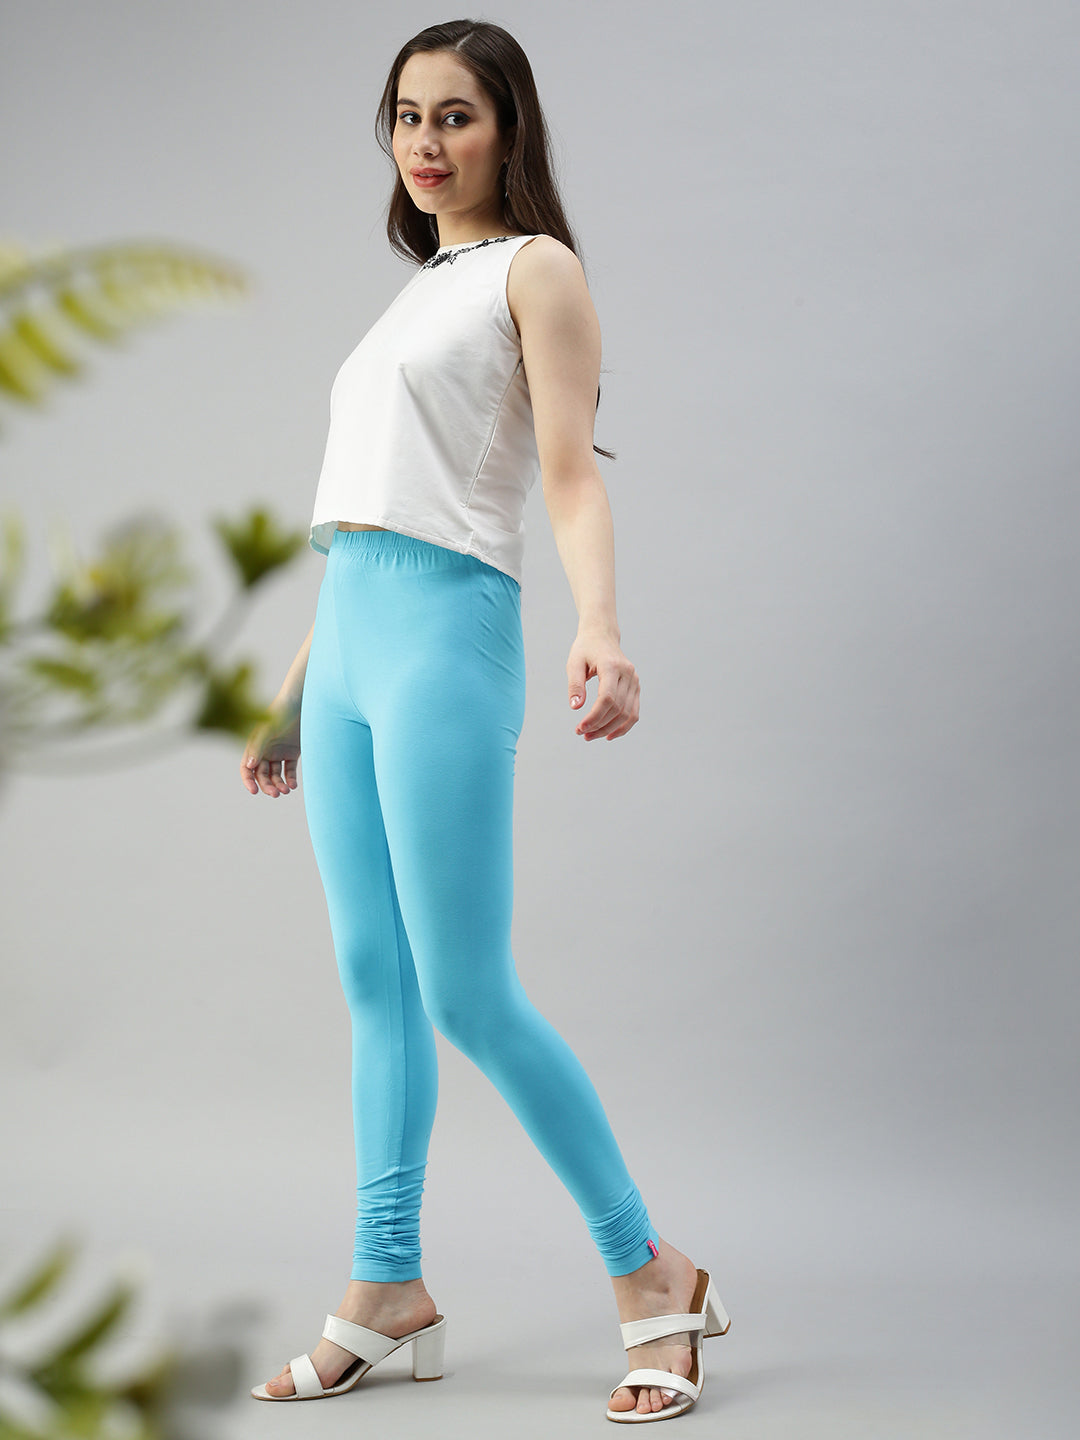 Indian Casual Wear Blue Cotton Leggings For Ladies, Full Length, Wrinkle  Free at Best Price in Tirupur